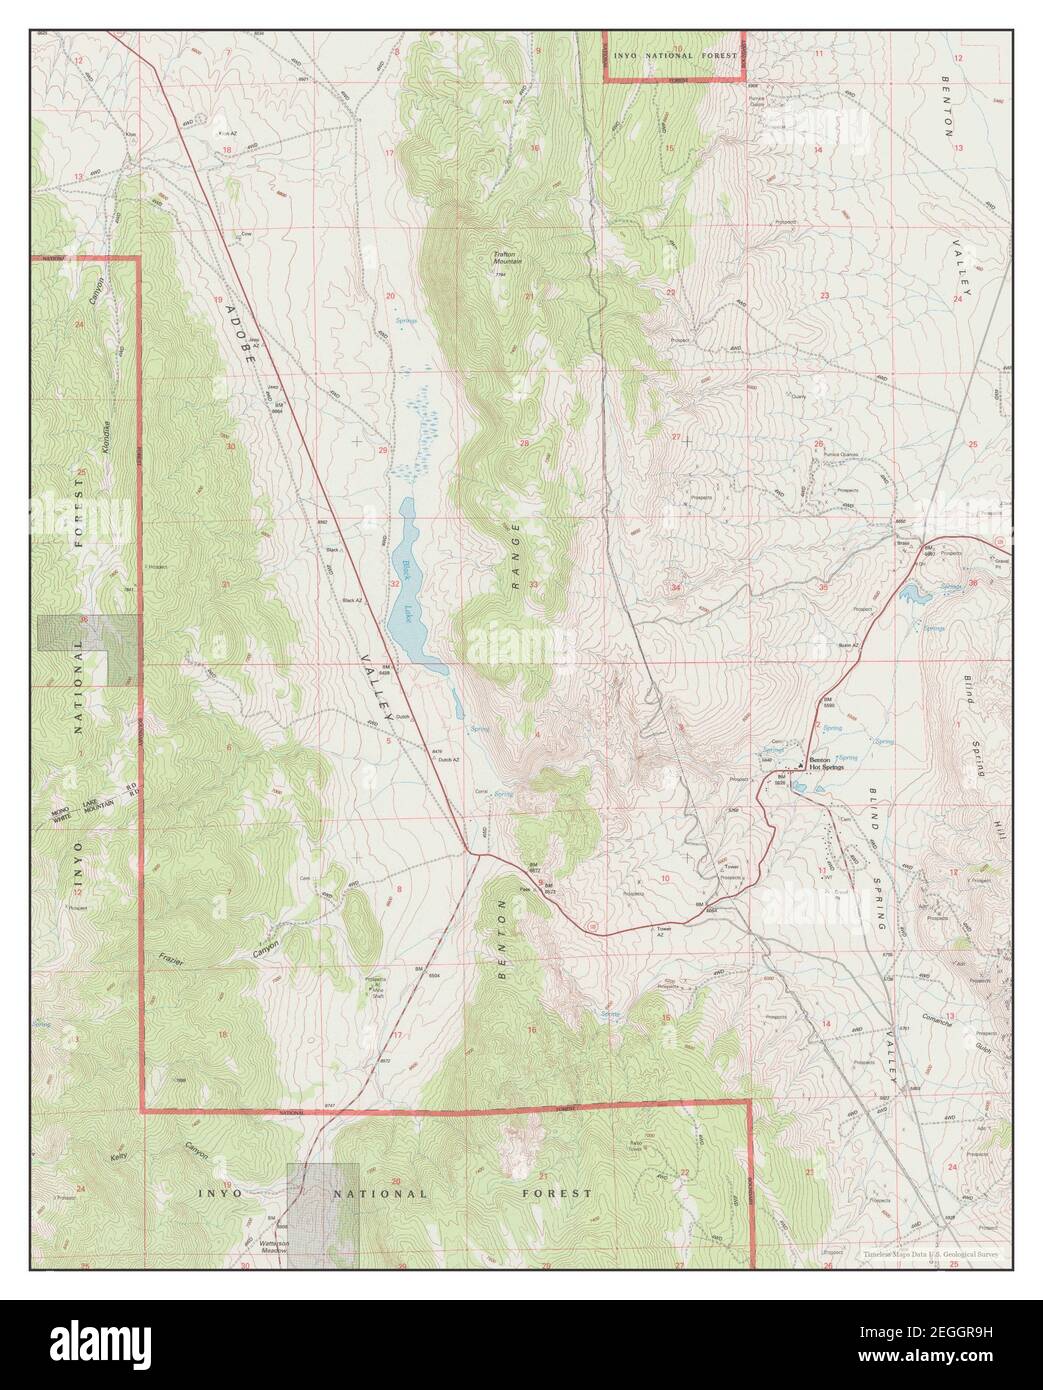 Benton Hot Springs, California, map 1994, 1:24000, United States of America by Timeless Maps, data U.S. Geological Survey Stock Photo